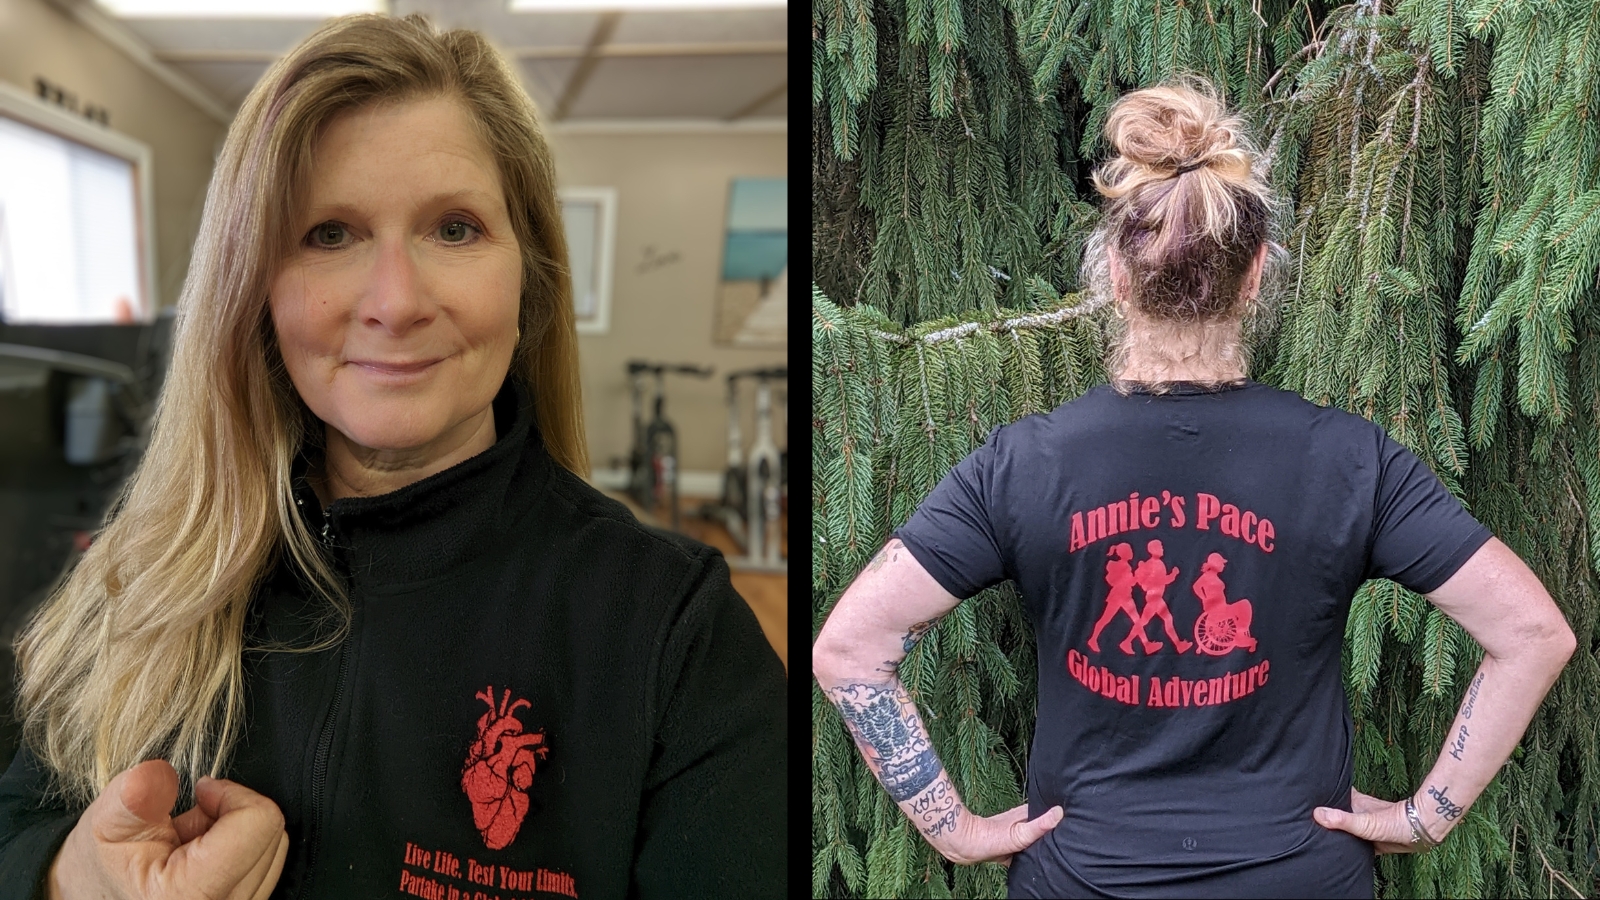 Annie Smith stands in a gym wearing a black turtleneck with a red heart and text logo on the left side in the first image; in the second image, Annie is seen from the back, outdoors, wearing a t-shirt featuring "Annie's Pace Global Adventure" logo, against a lush green hedge.